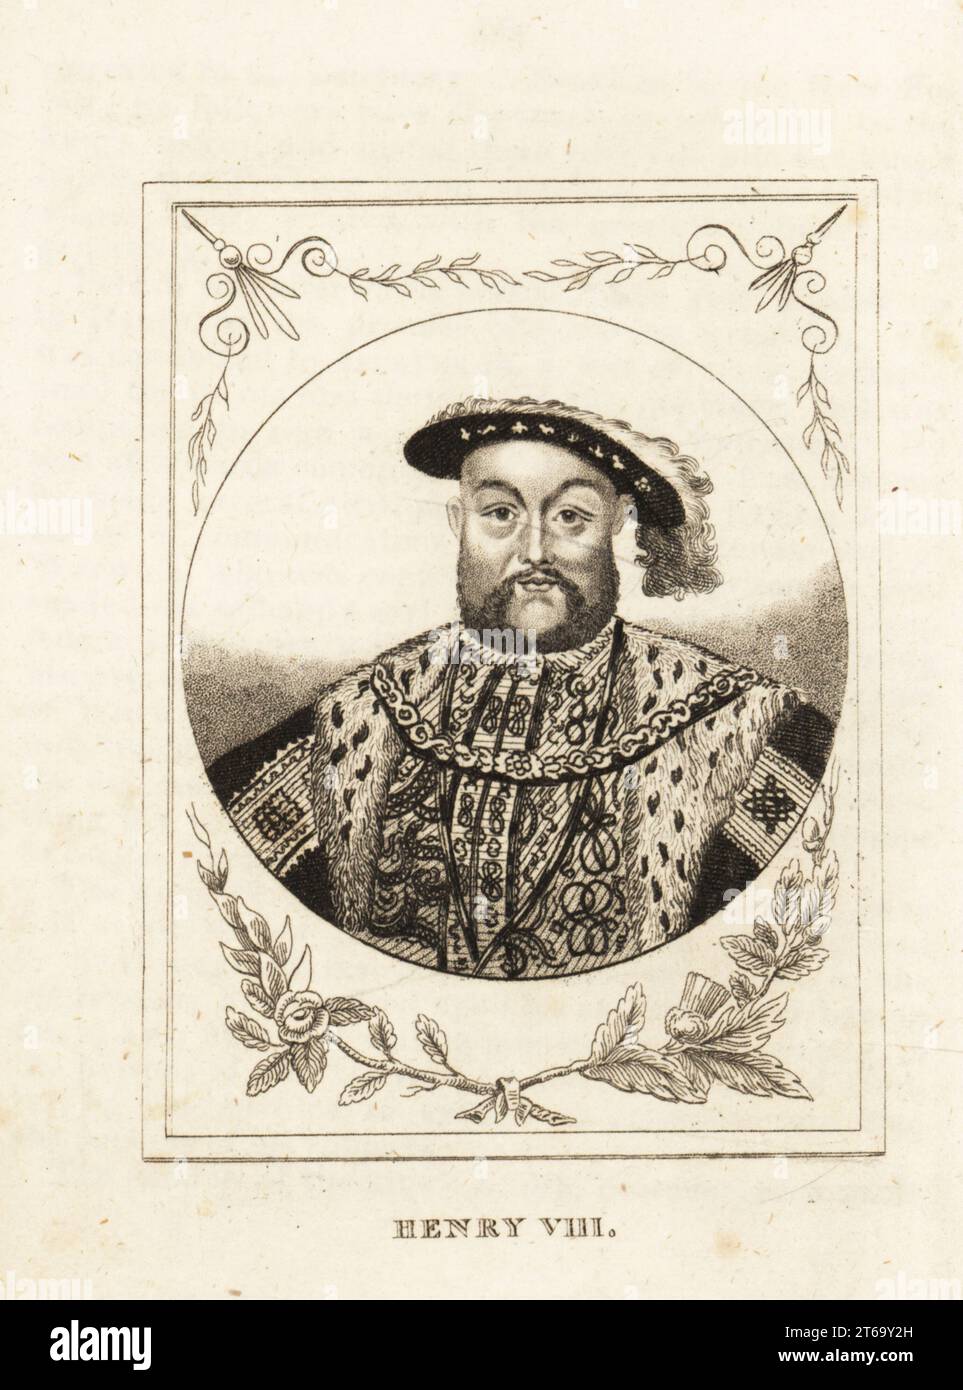 Portrait of King Henry VIII of England, 1491-1547. Copperplate engraving after Hans Holbein from M. A. Jones History of England from Julius Caesar to George IV, G. Virtue, 26 Ivy Lane, London, 1836. Stock Photo